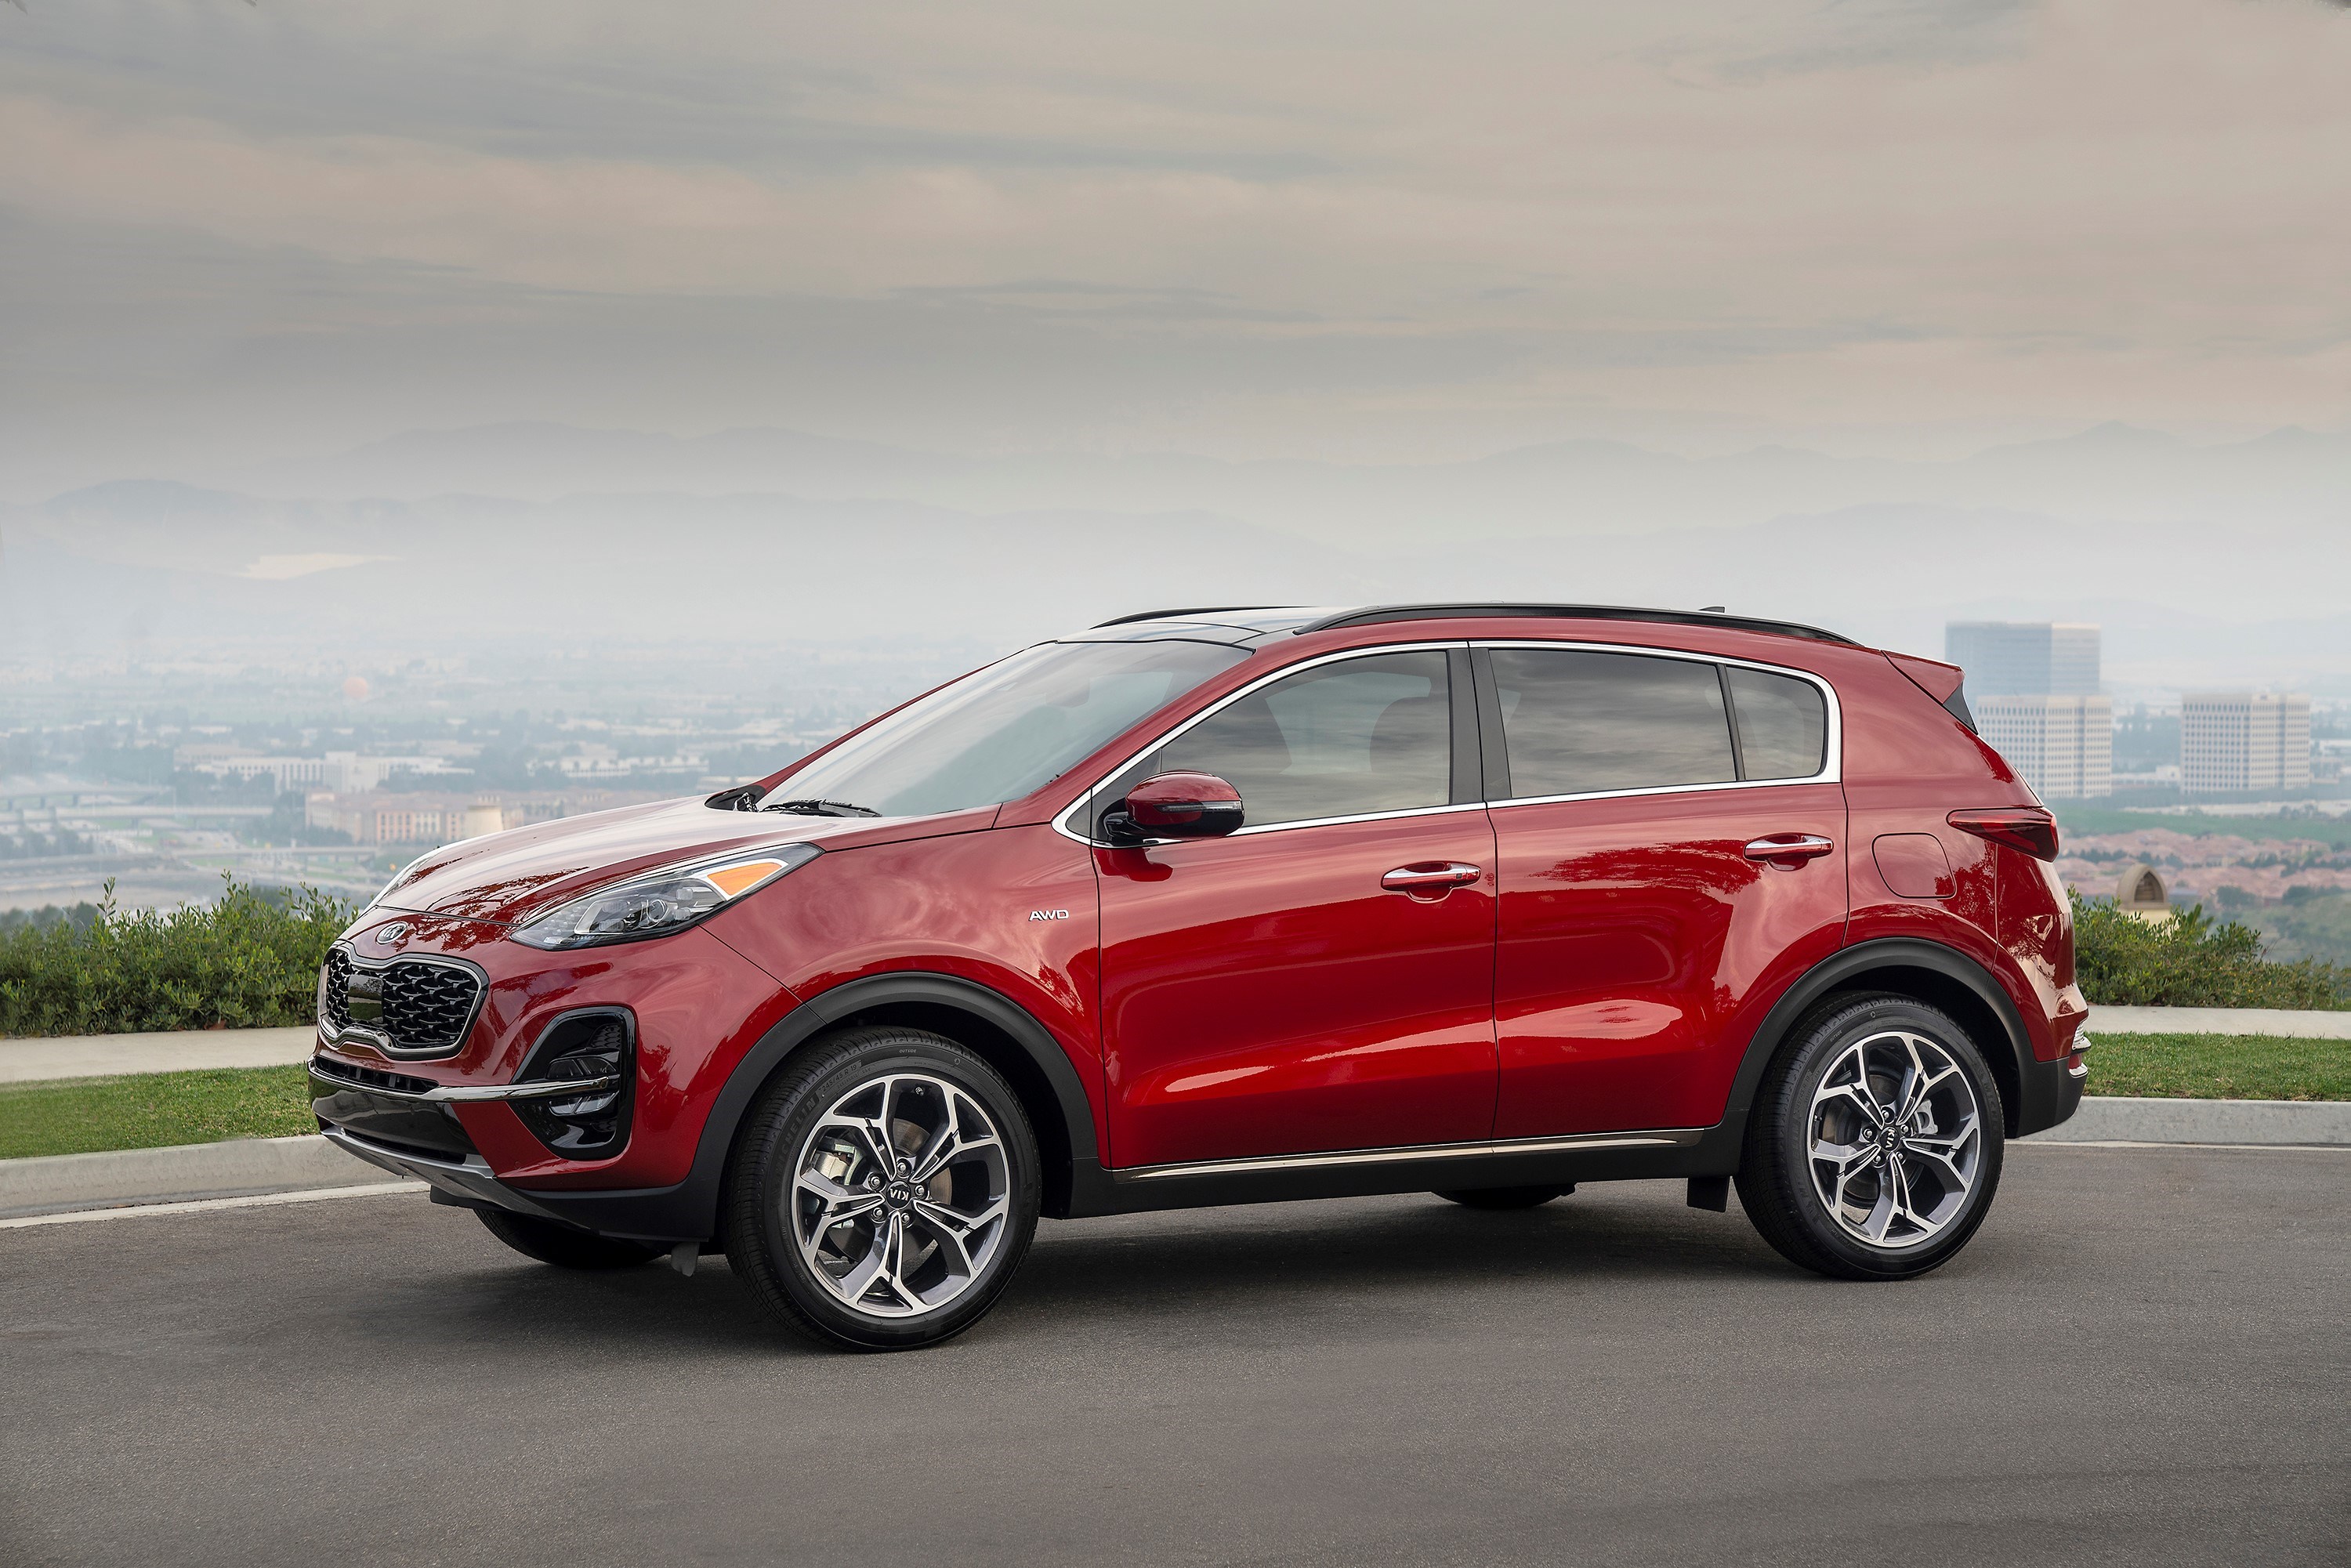 2020 Kia Sportage Review, Ratings, Specs, Prices, and Photos - The Car ...